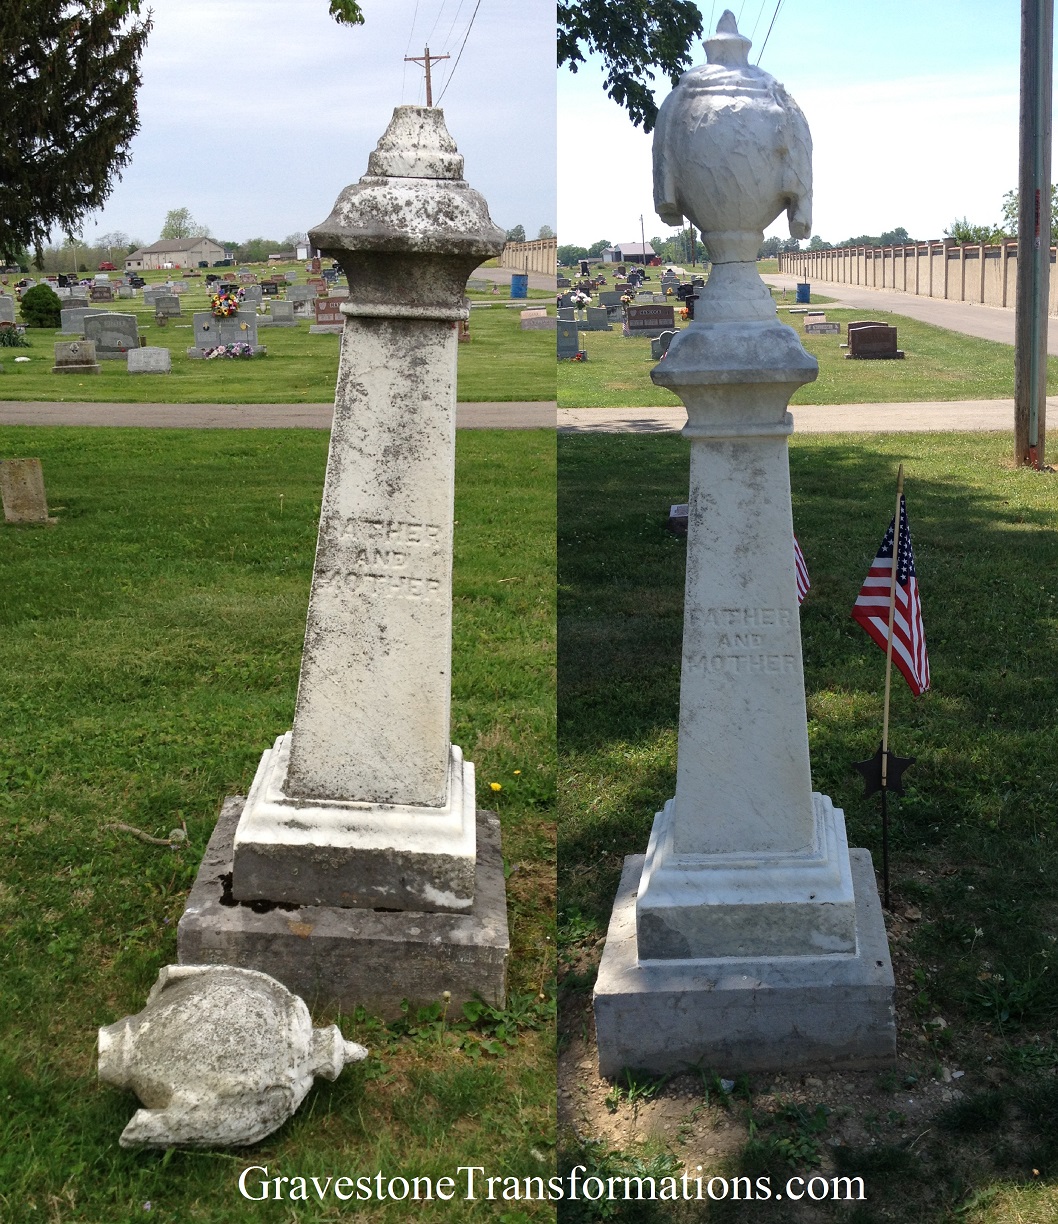 Gravestone Transformations, Mark Smith, historic cemetery preservationist, Peebles, Adams County, Ohio, provided conservation services to preserve the monument of George and Rachel Plumb, Beckett Cemetery, Pickaway County, Commercial Point, Ohio.